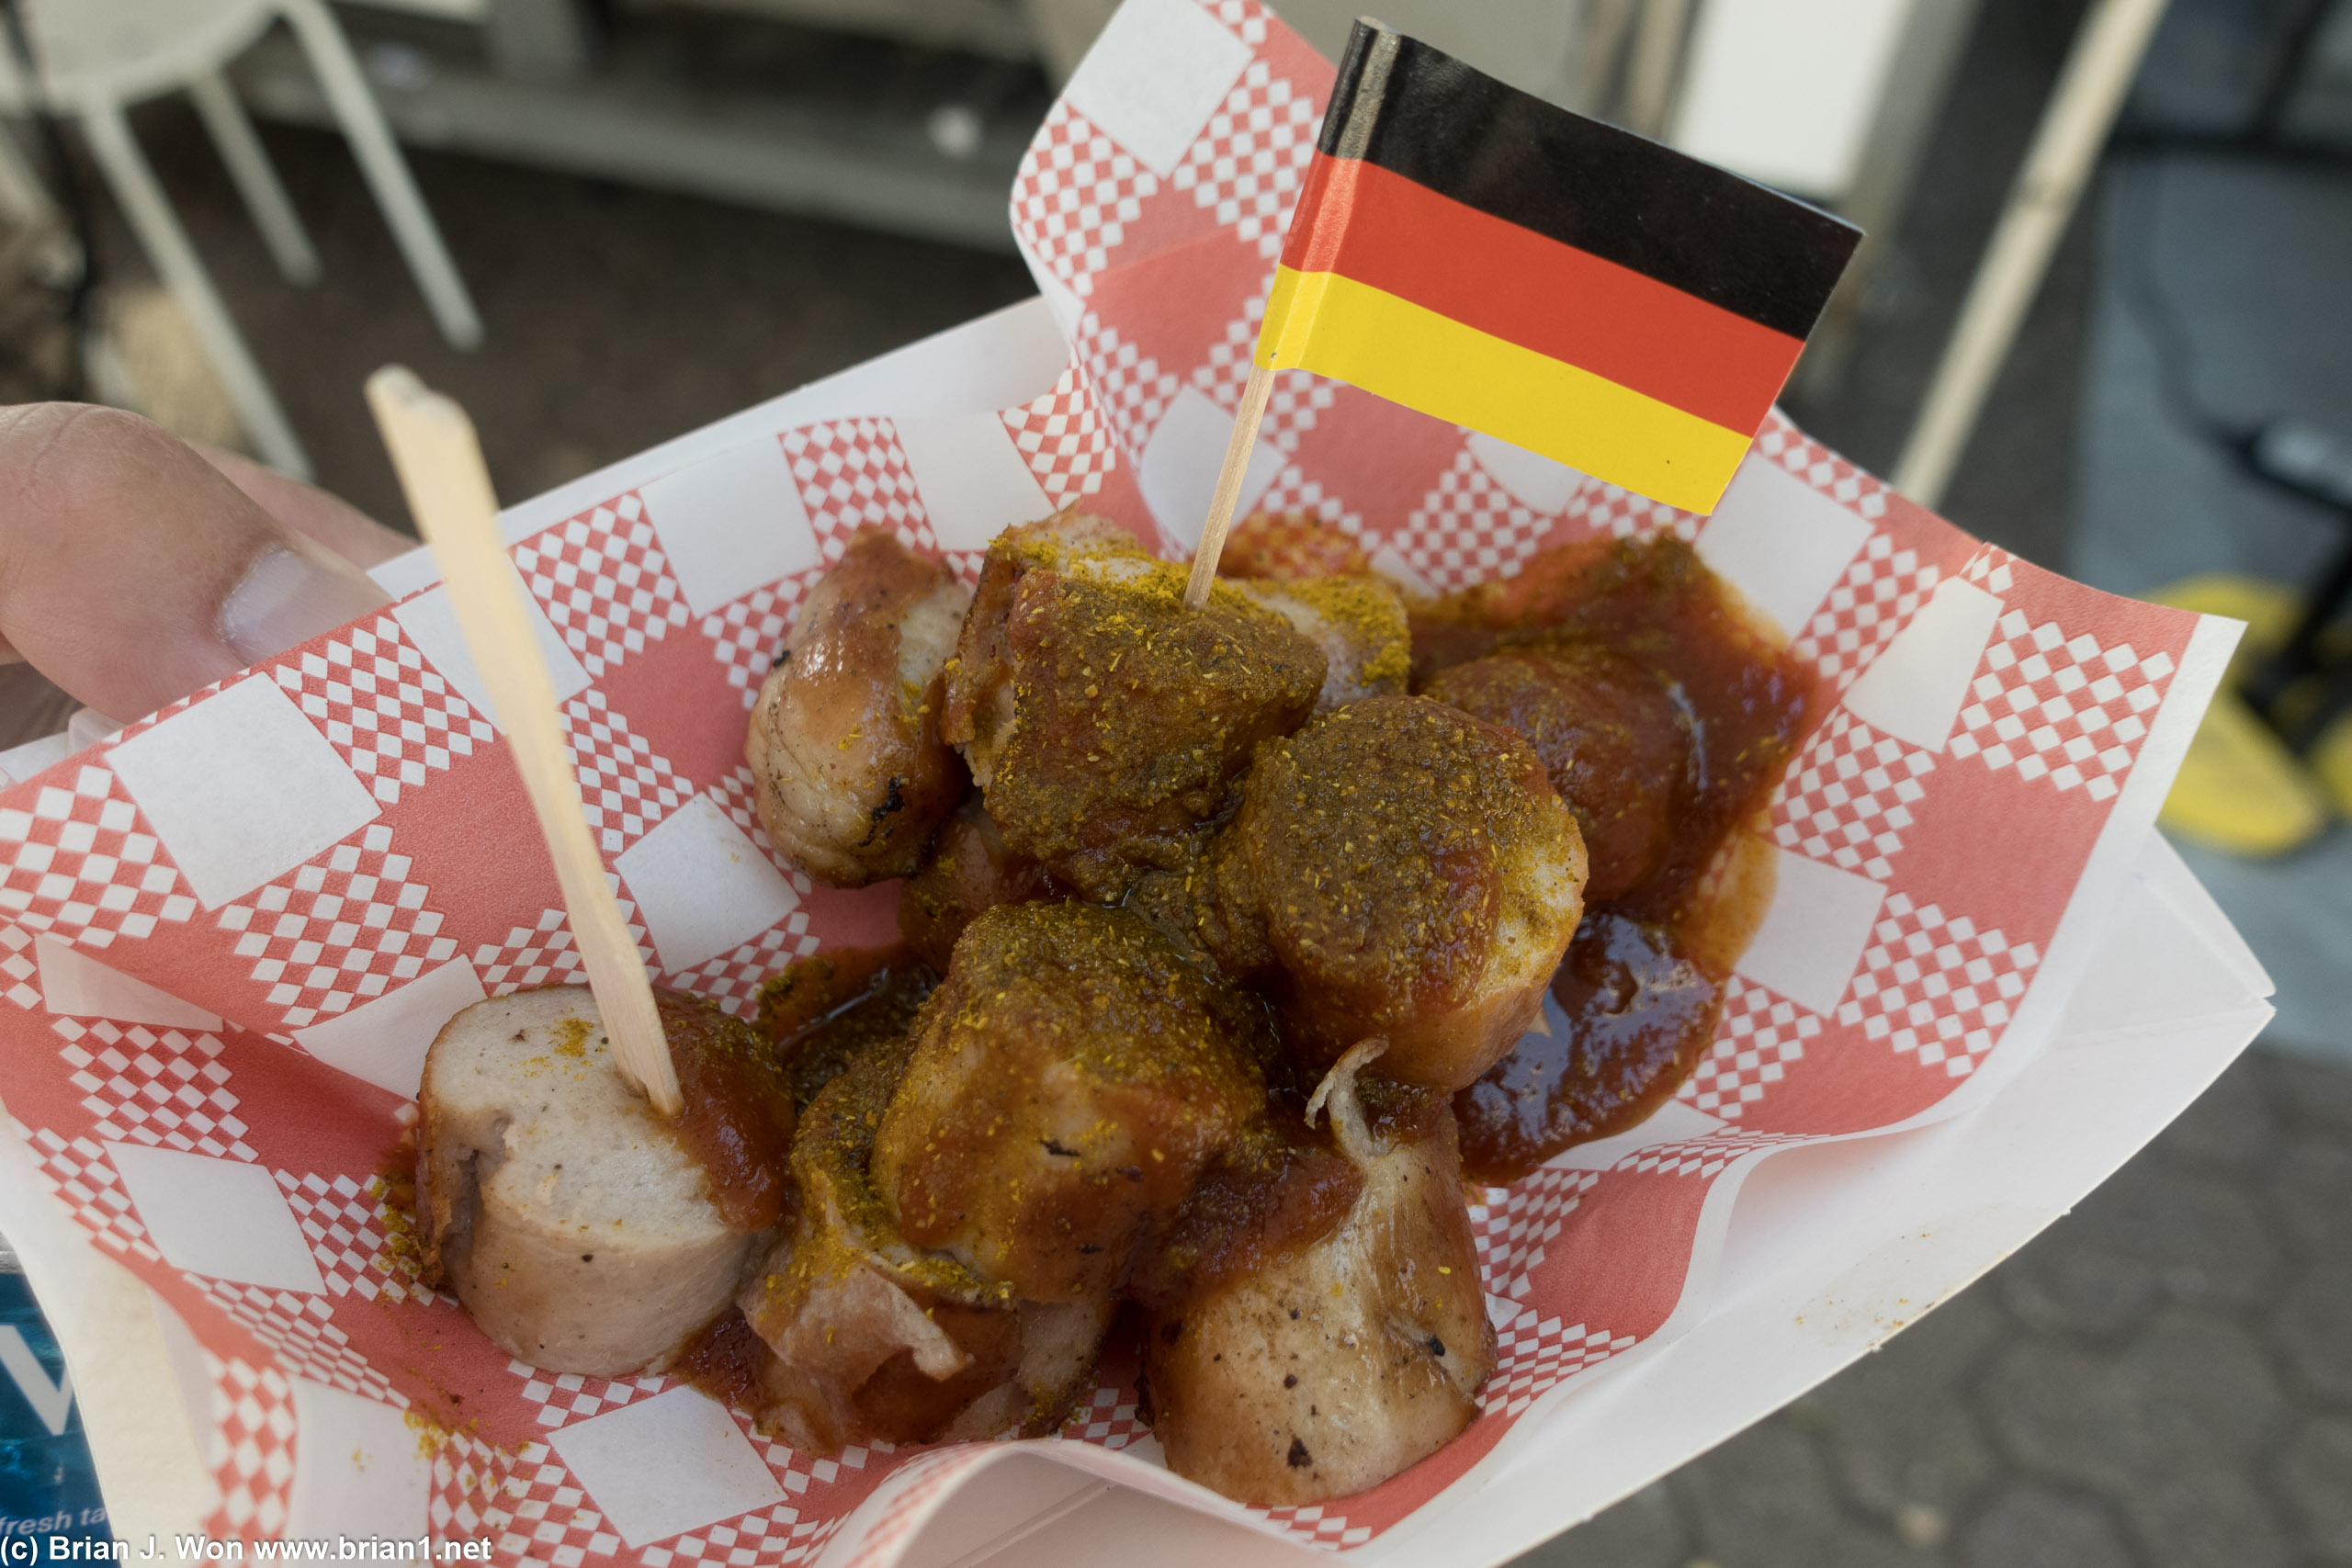 Currywurst was okay.